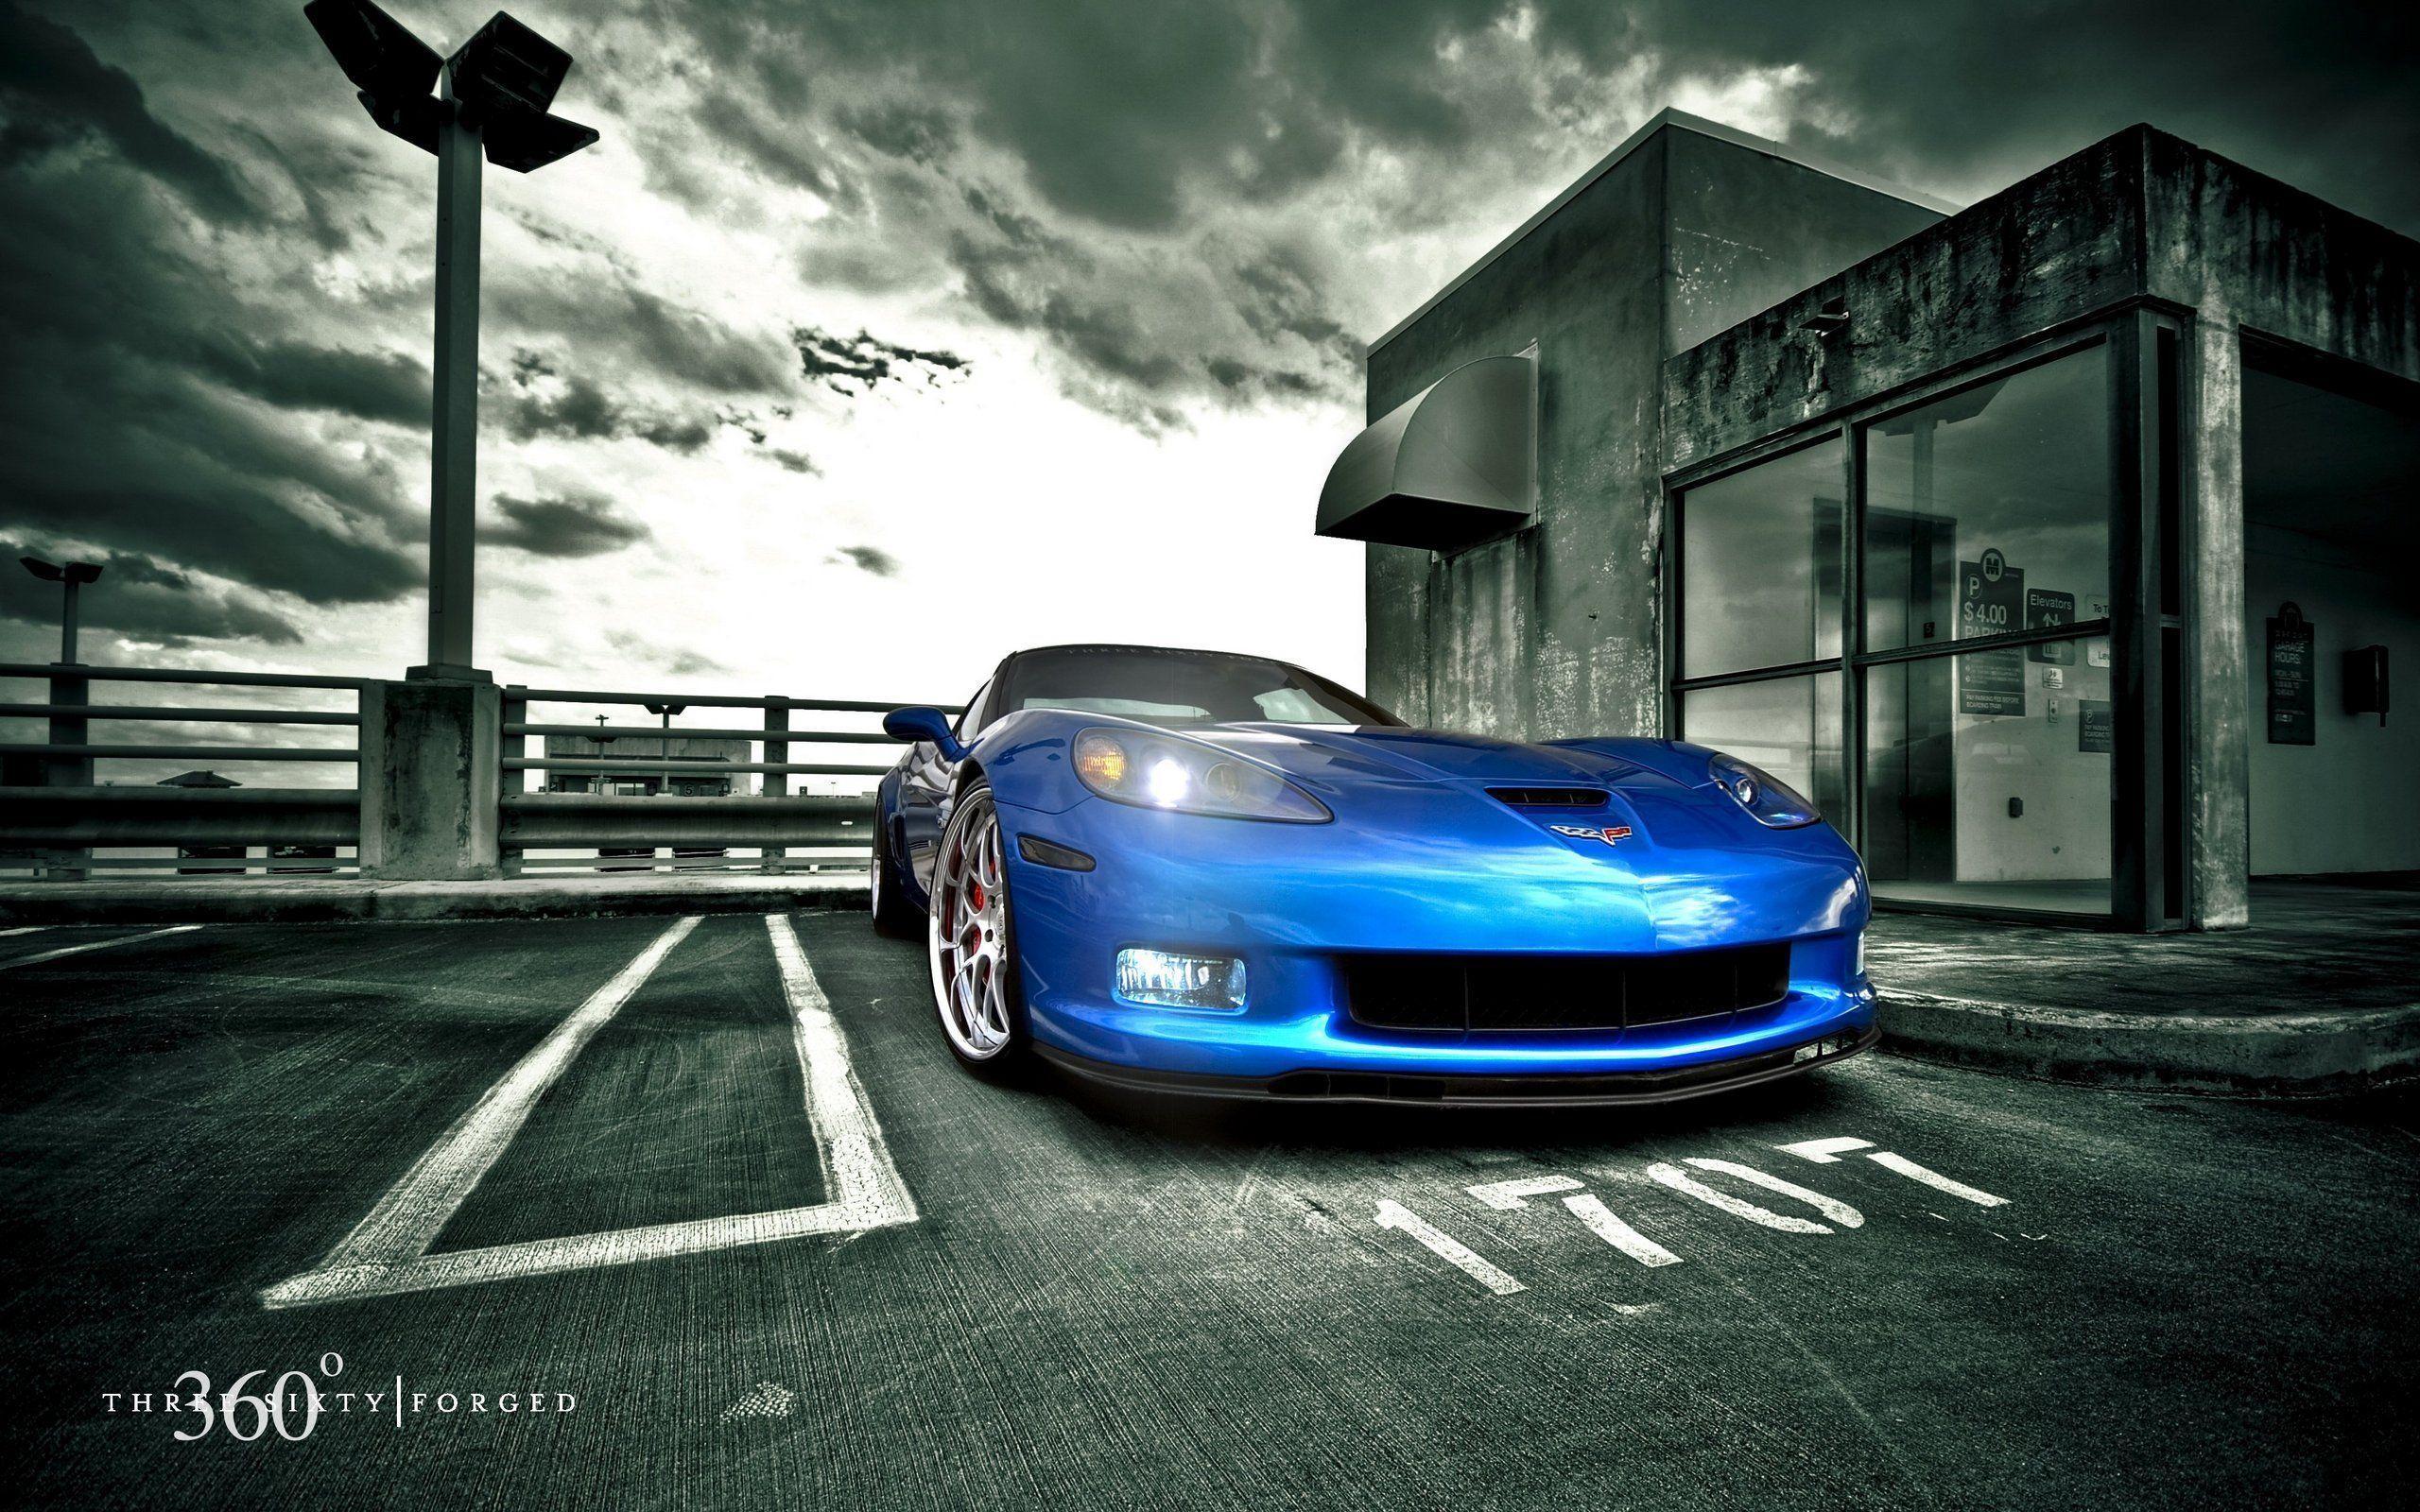 Cars, Lovely Cars Image HD Nice Blue Sports Car HD Photography